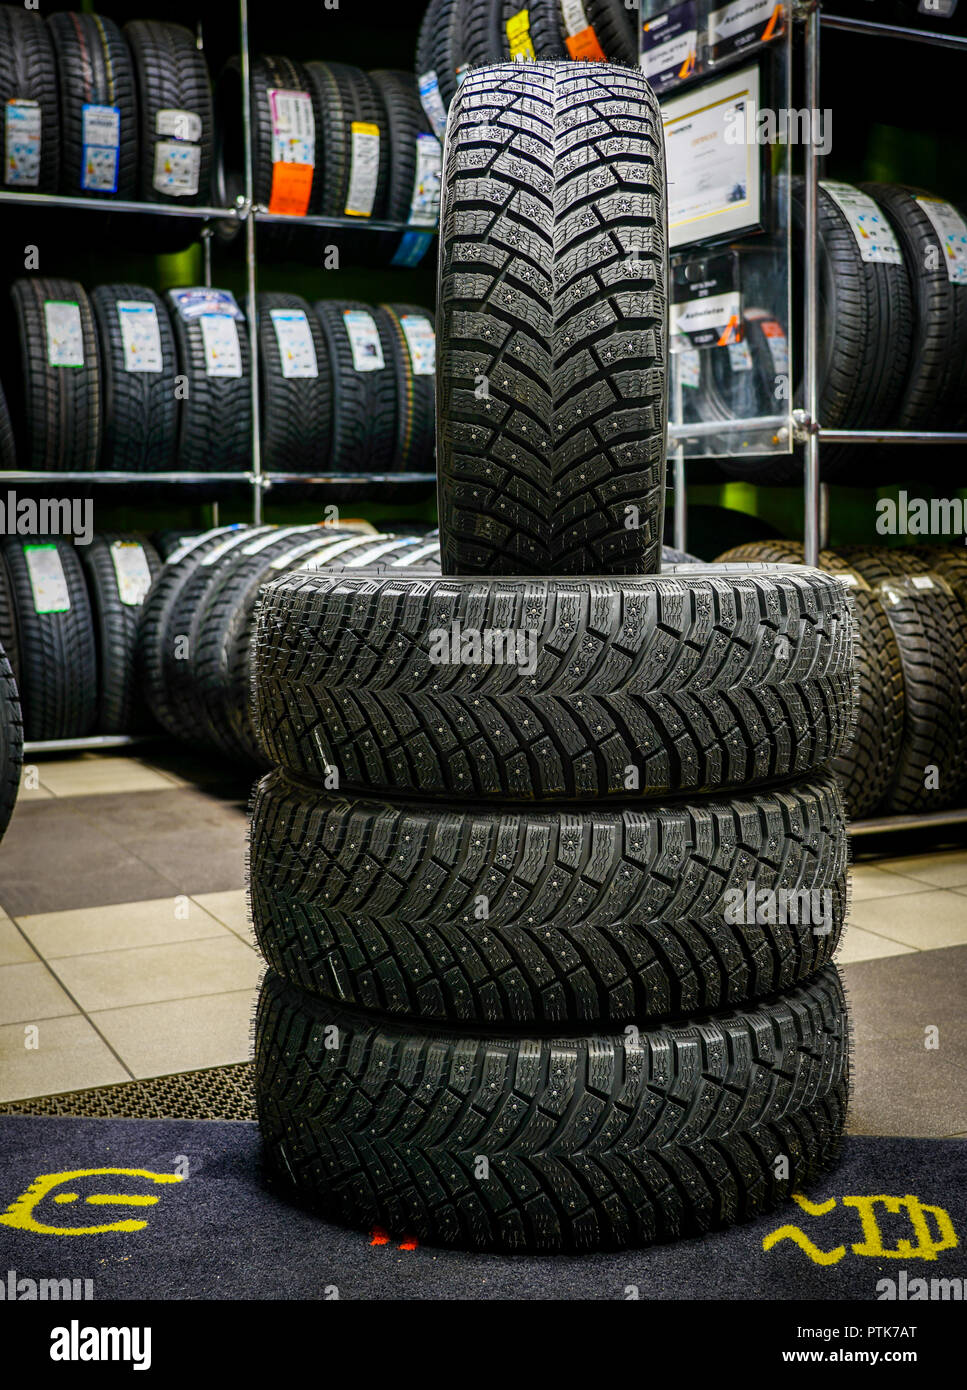 set of new winter tires with studs, tire shop in the background Stock Photo